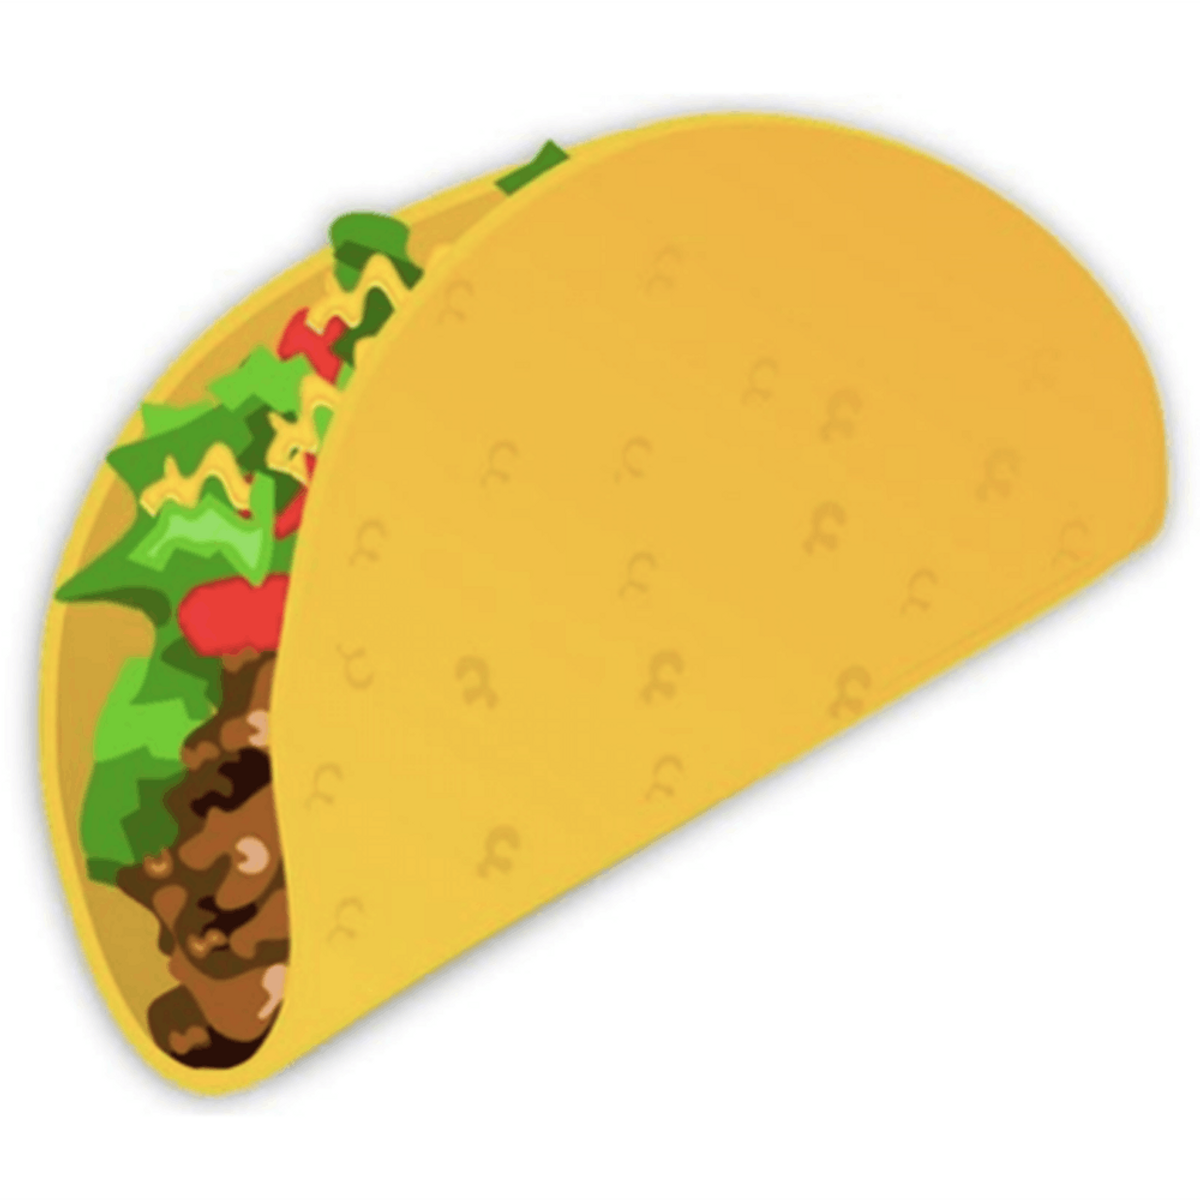 The Moment We’ve All Been Waiting For: The Taco Emoji Is Here!